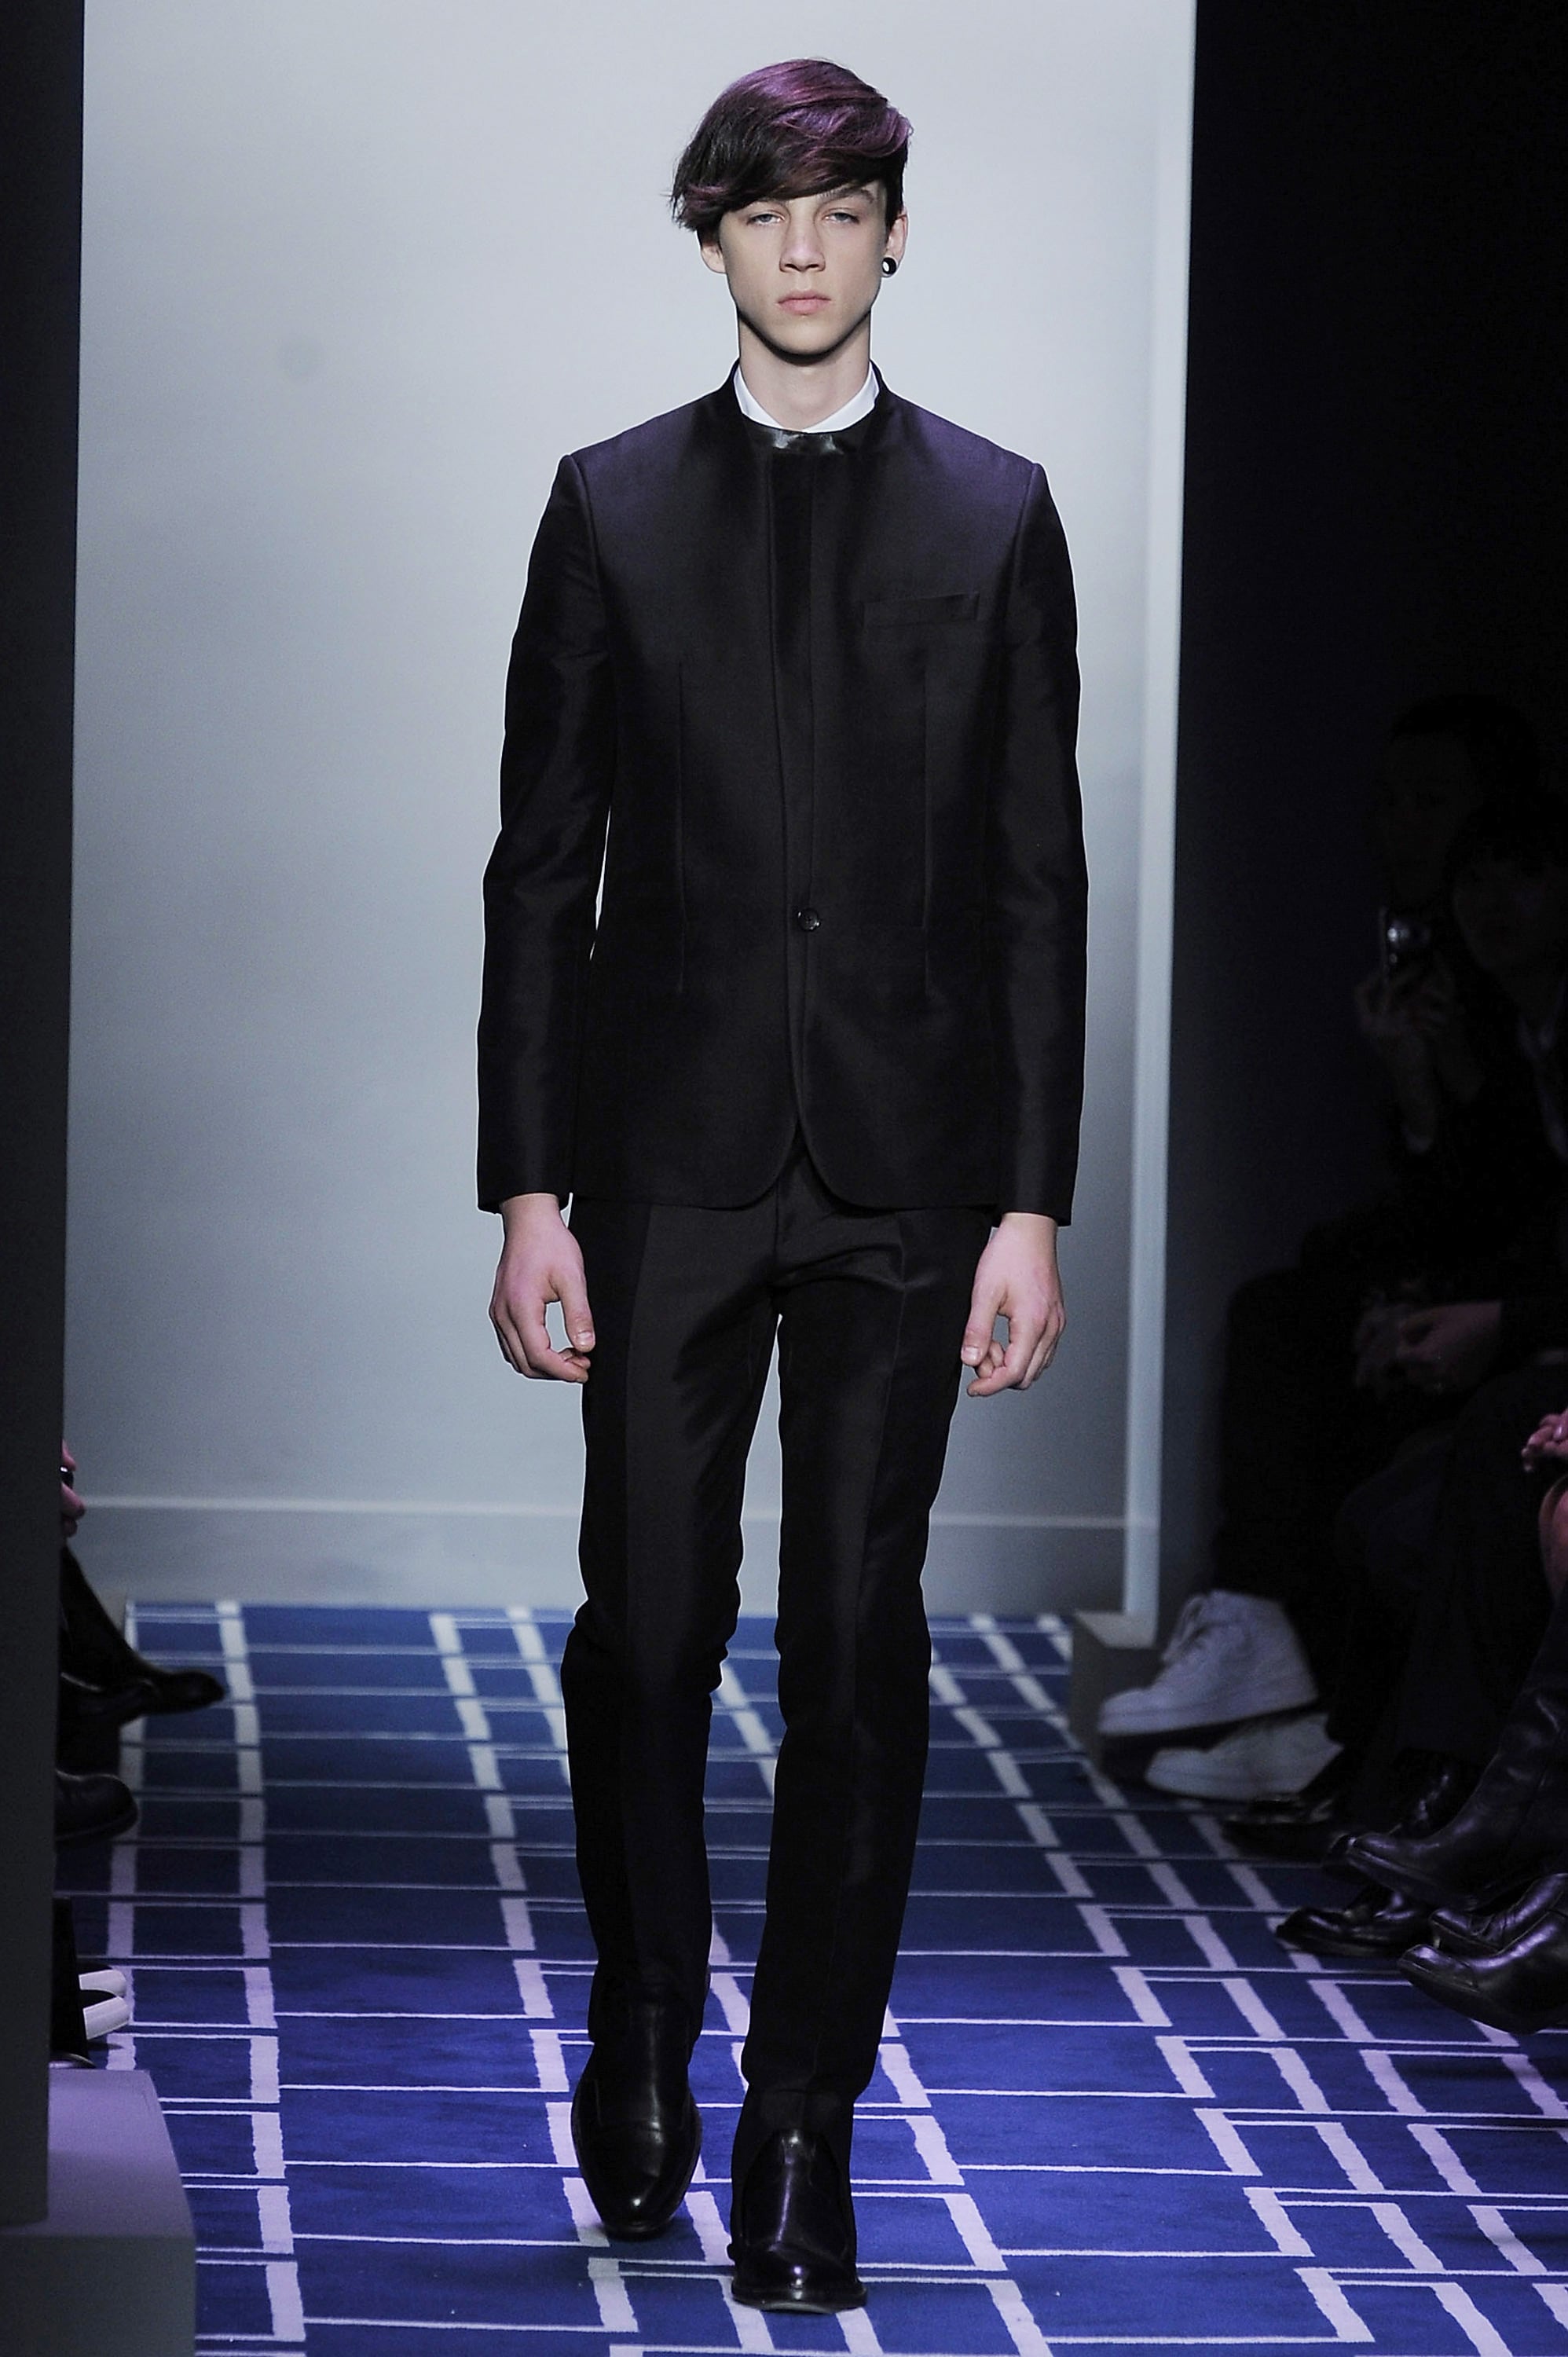 Demna Gvasalias First Mens Collection for Balenciaga Includes Huge  Shoulders Perfect Heels  Racked